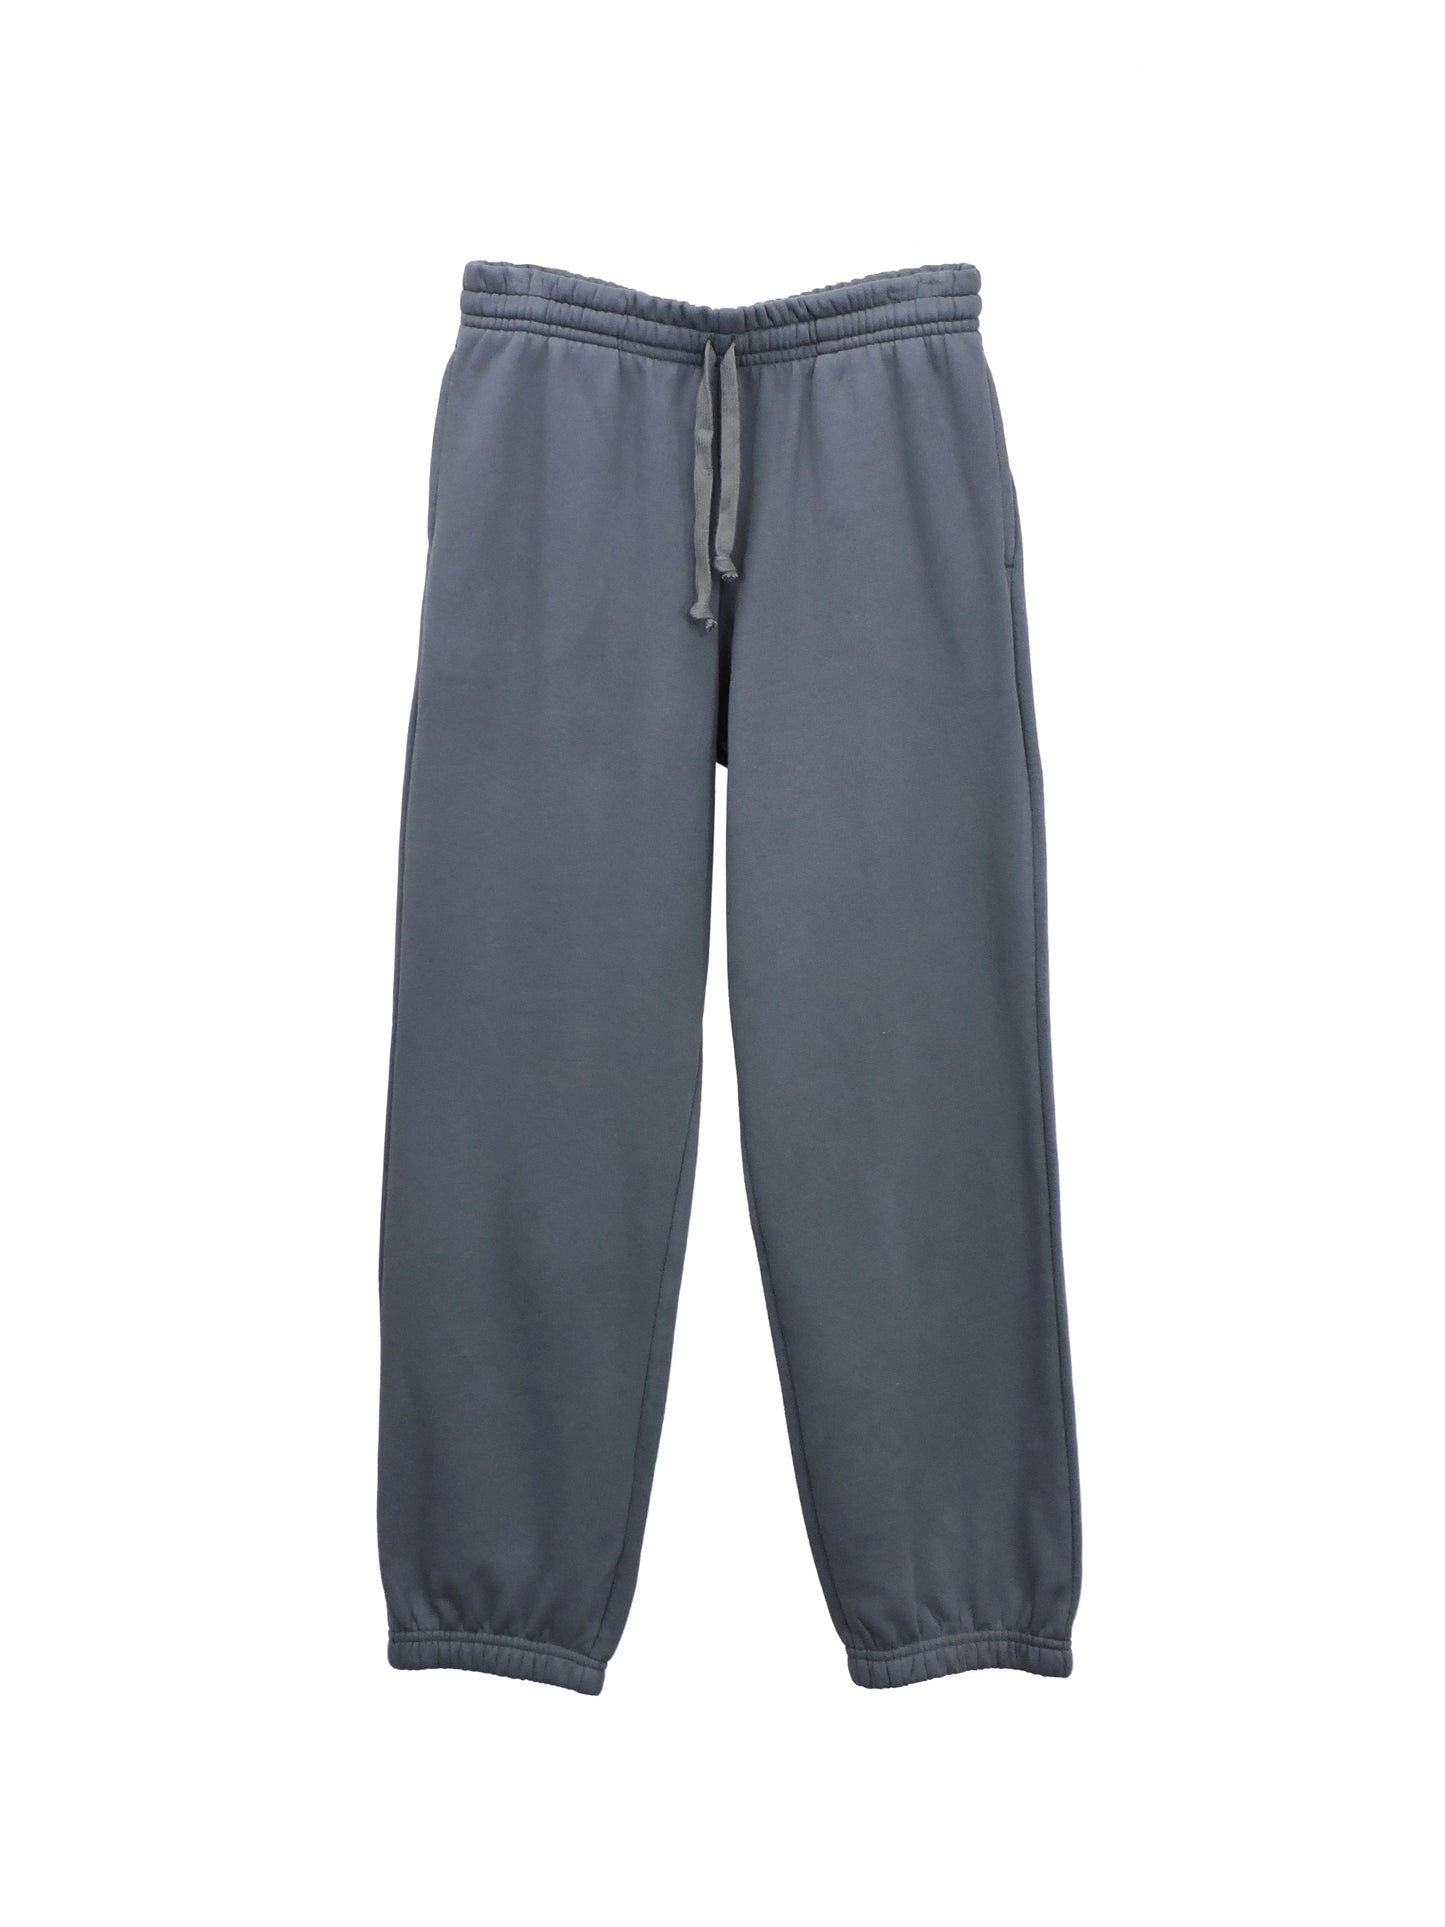 Front of French Terry Terry Sweatpants featuring drawstrings and flexible ankle cuffs